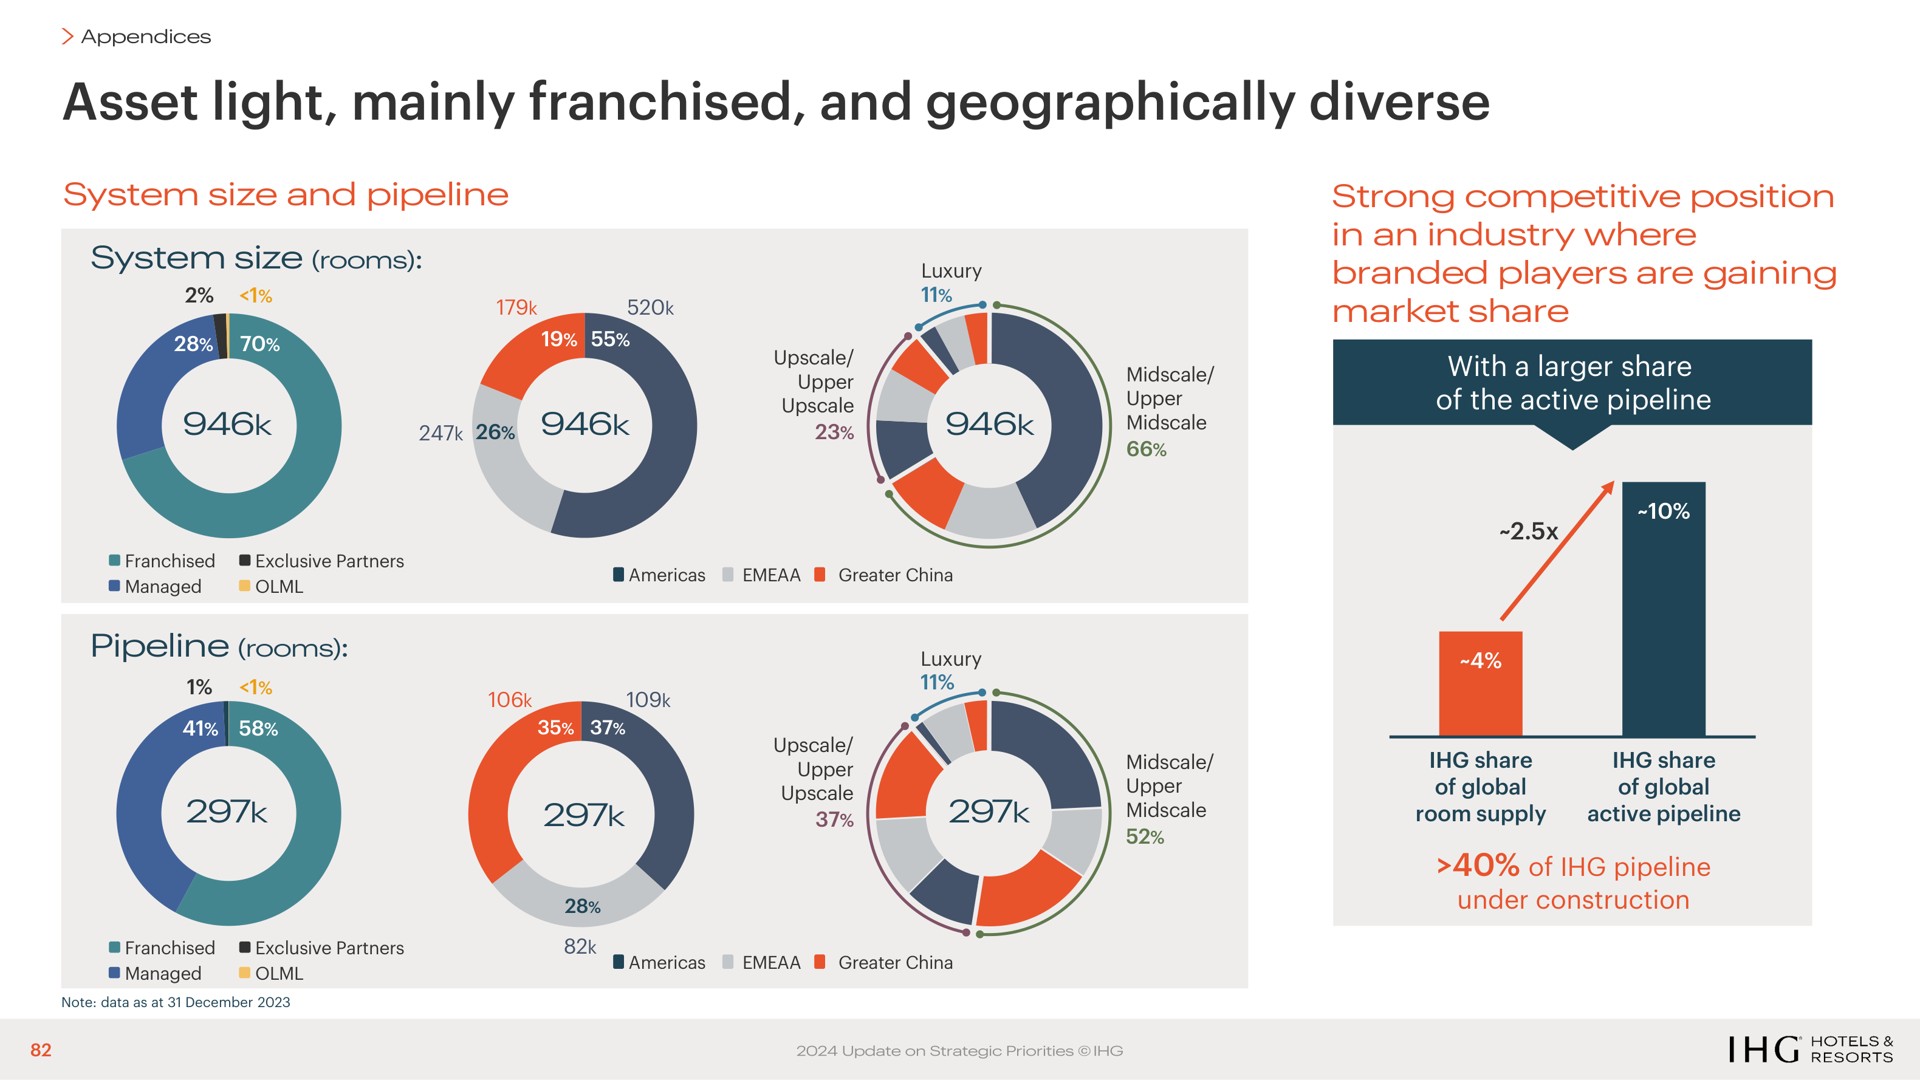 asset light mainly franchised and geographically diverse | IHG Hotels